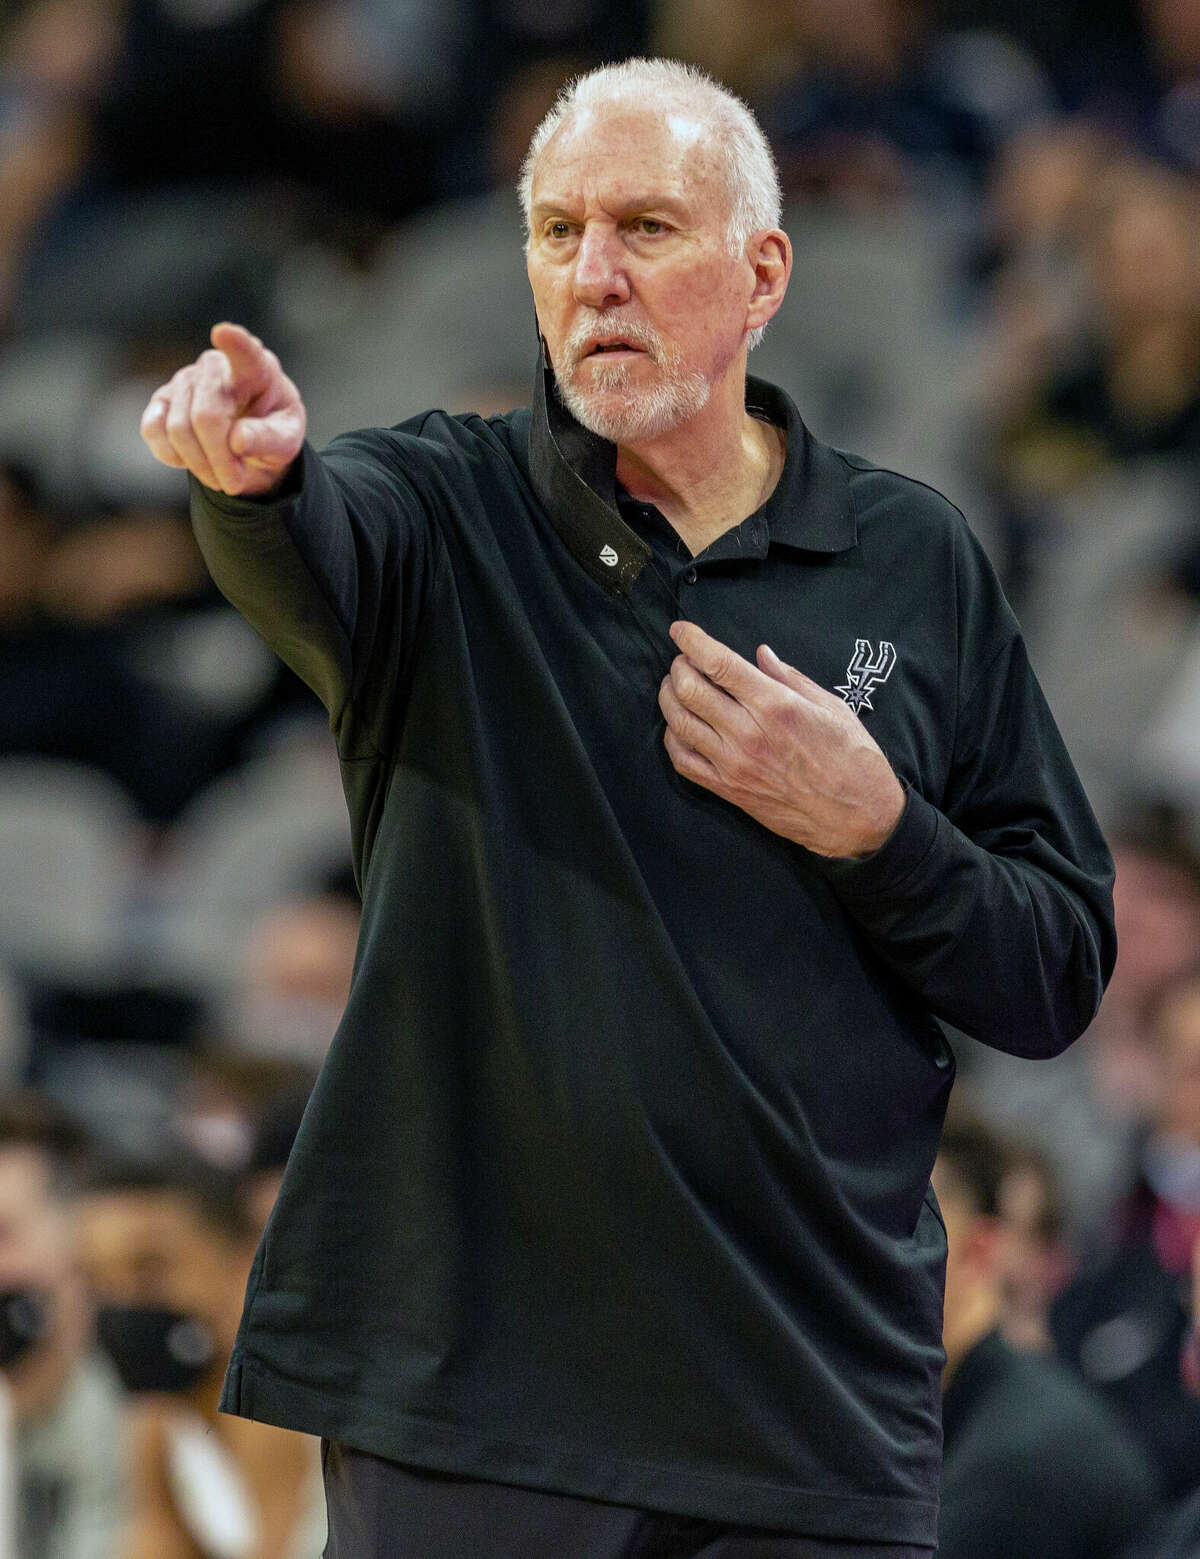 Spurs' Gregg Popovich calls out Republicans by name over gun laws